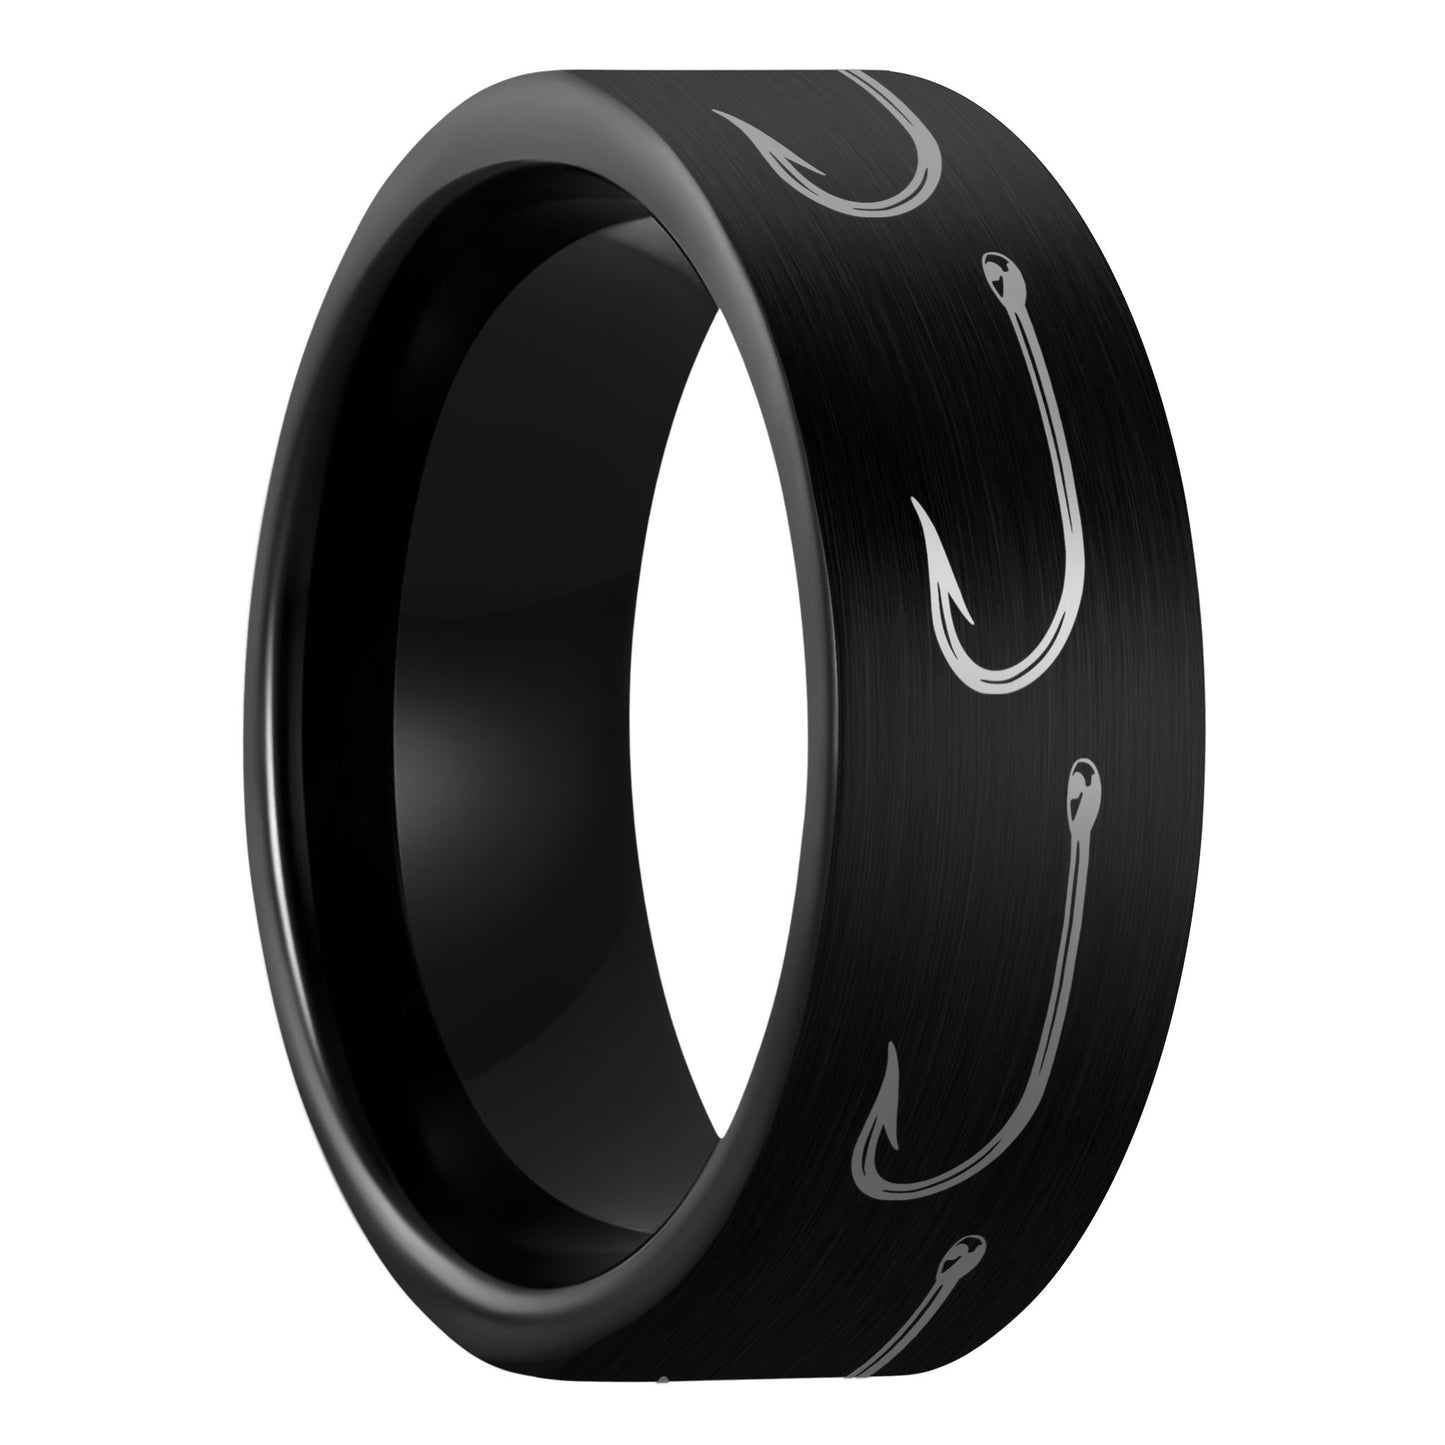 A fishing hook brushed black tungsten men's wedding band displayed on a plain white background.